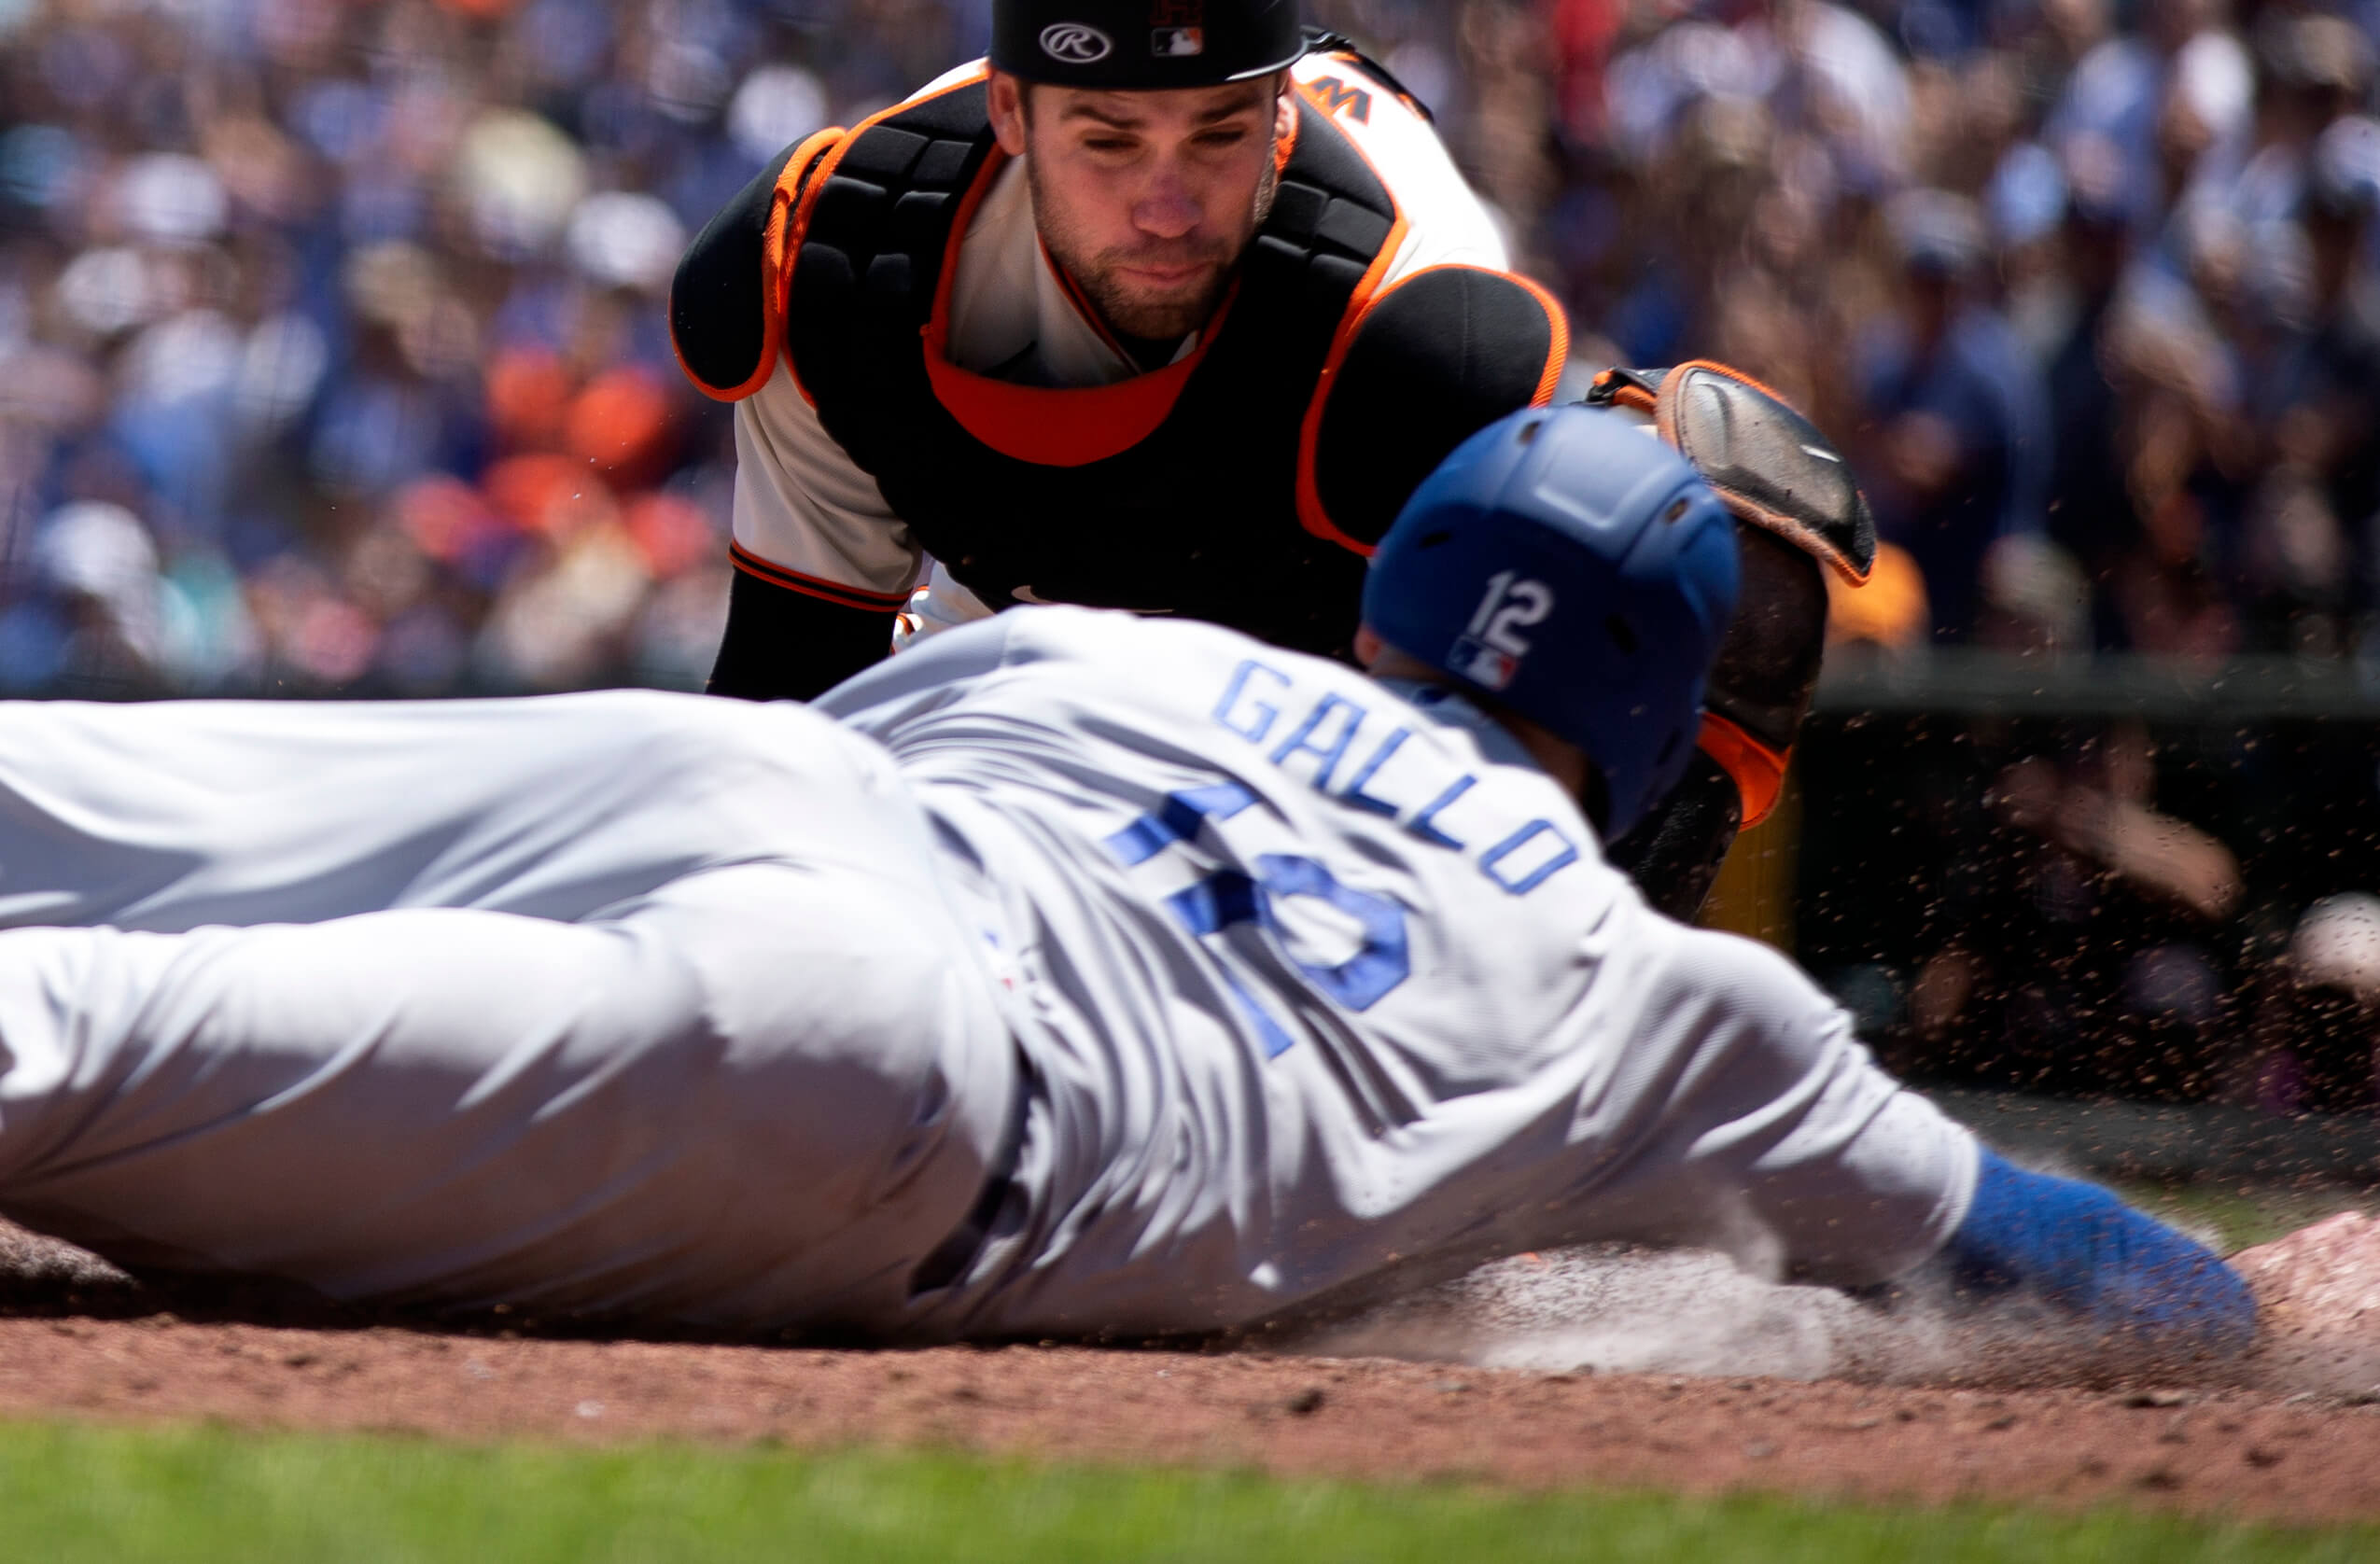 San Francisco Giants catcher Austin Wynns (14) prepares to put the tag on Los Angeles Dodgers left fielder Joey Gallo (12) as he tries to score on a double by Gavin Lux during the fourth inning at Oracle Park.